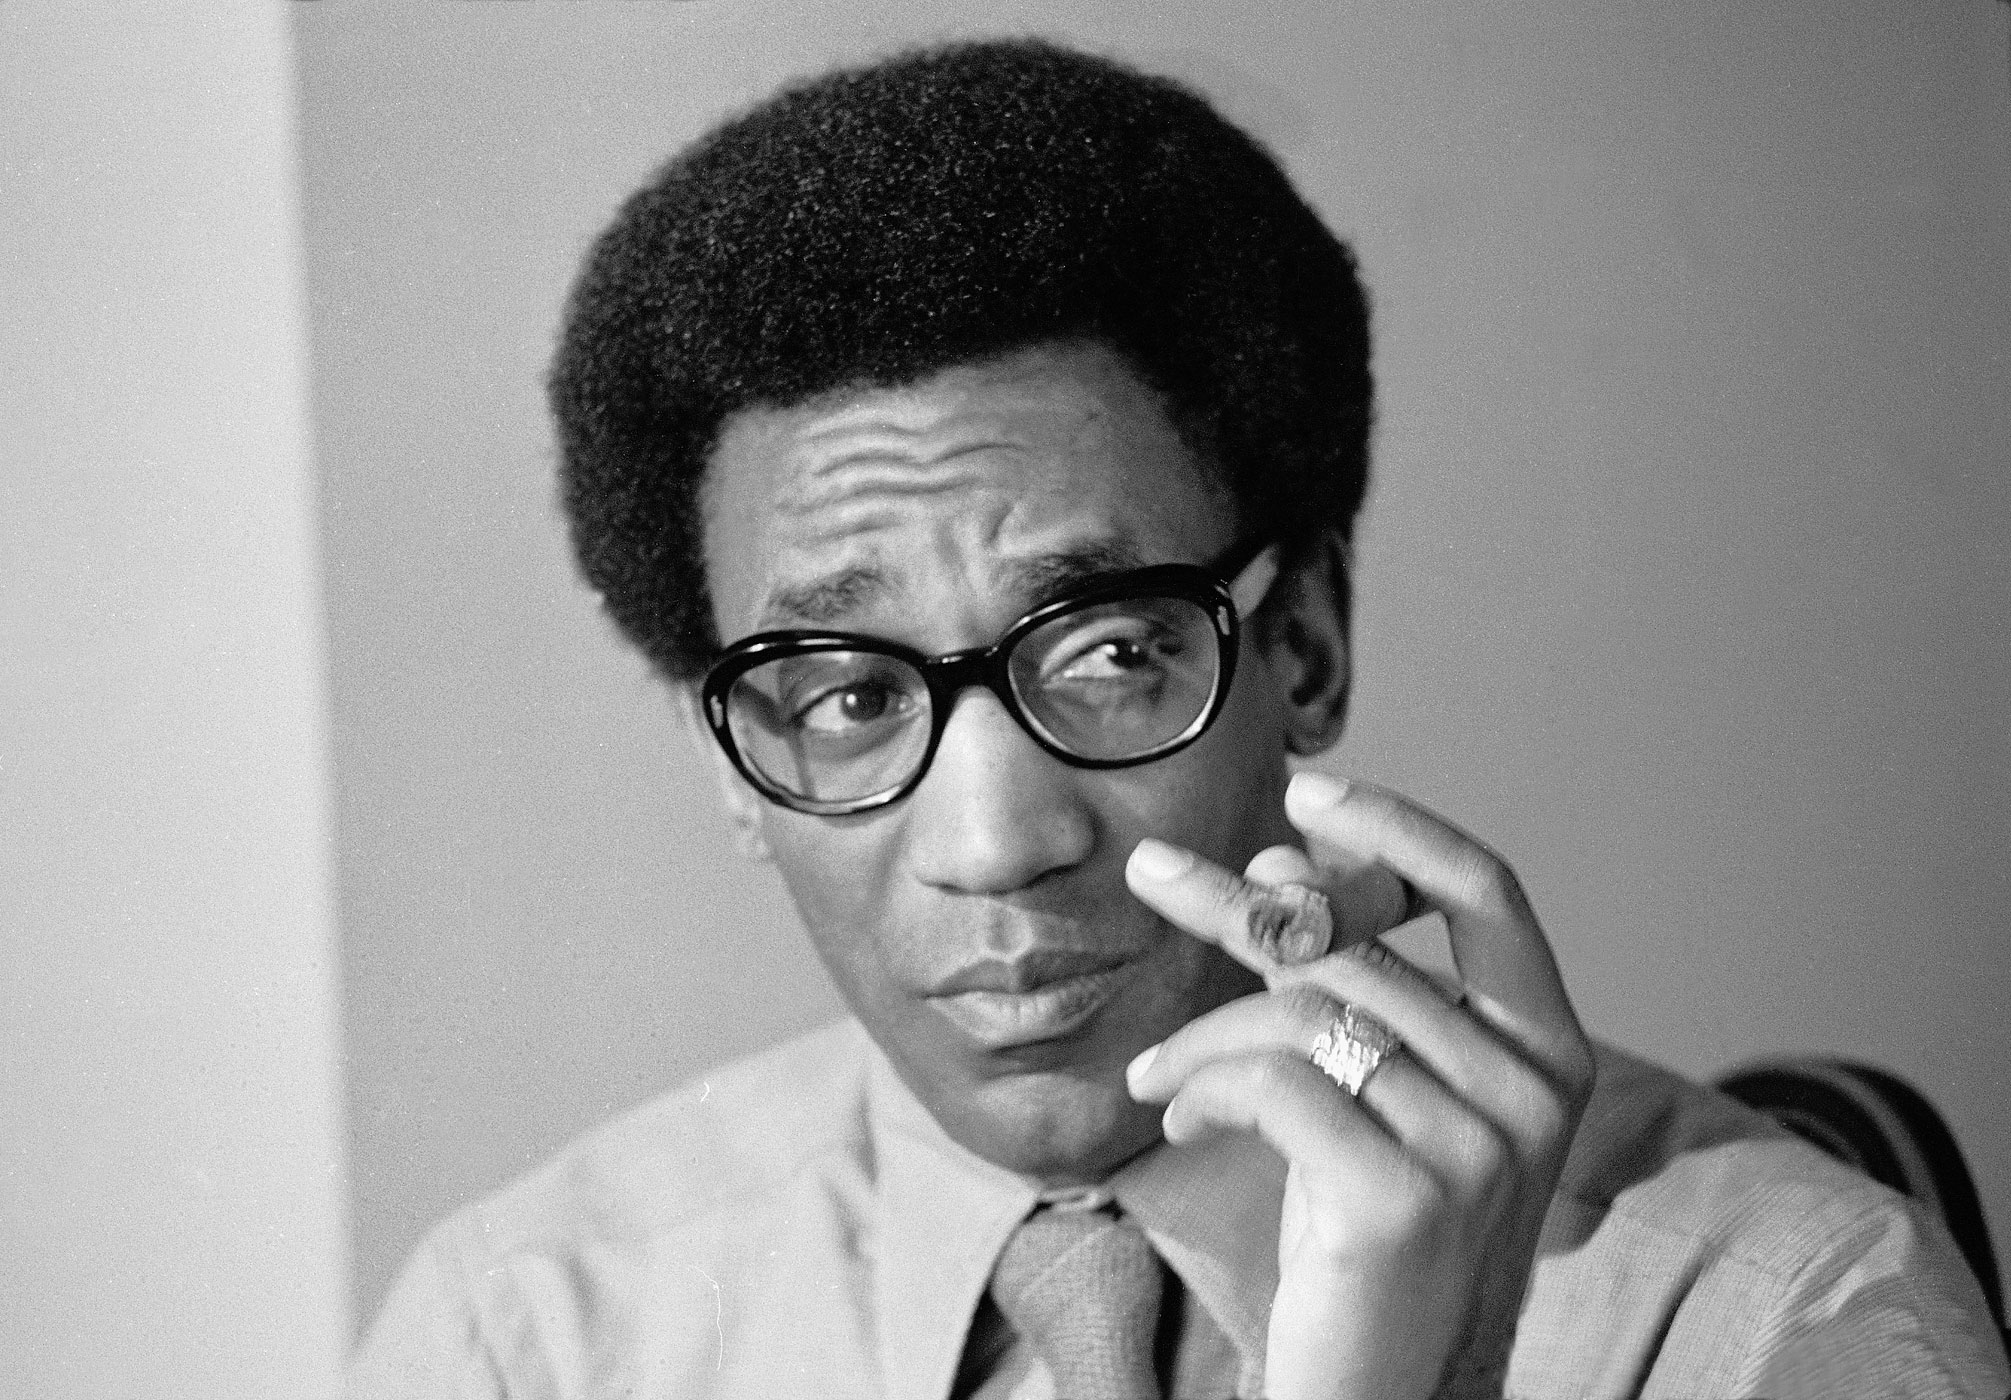 A portrait of Bill Cosby taken in 1969 (Alfred Eisenstaedt—The LIFE Picture Collection/Getty Images)